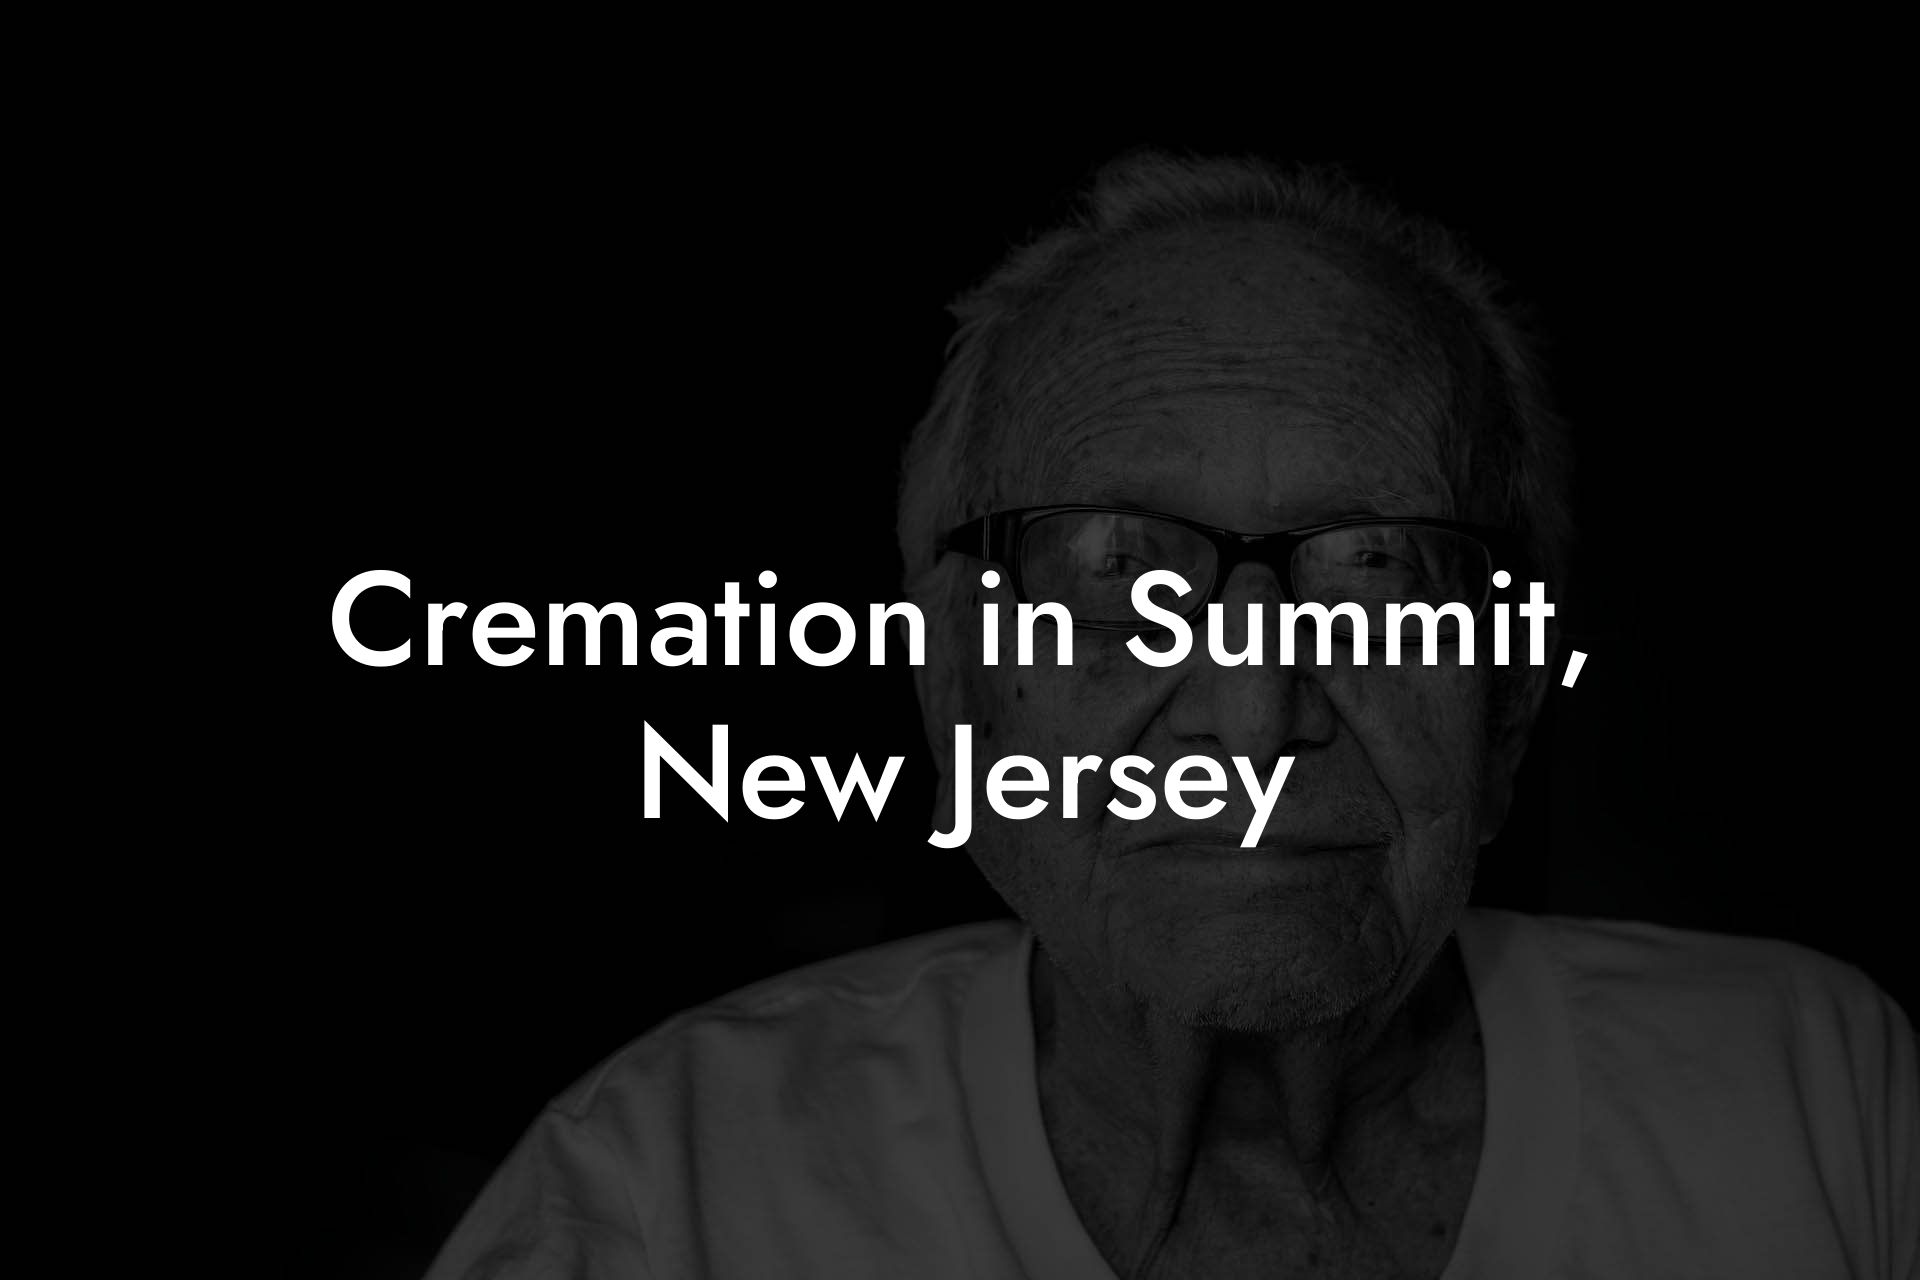 Cremation in Summit, New Jersey